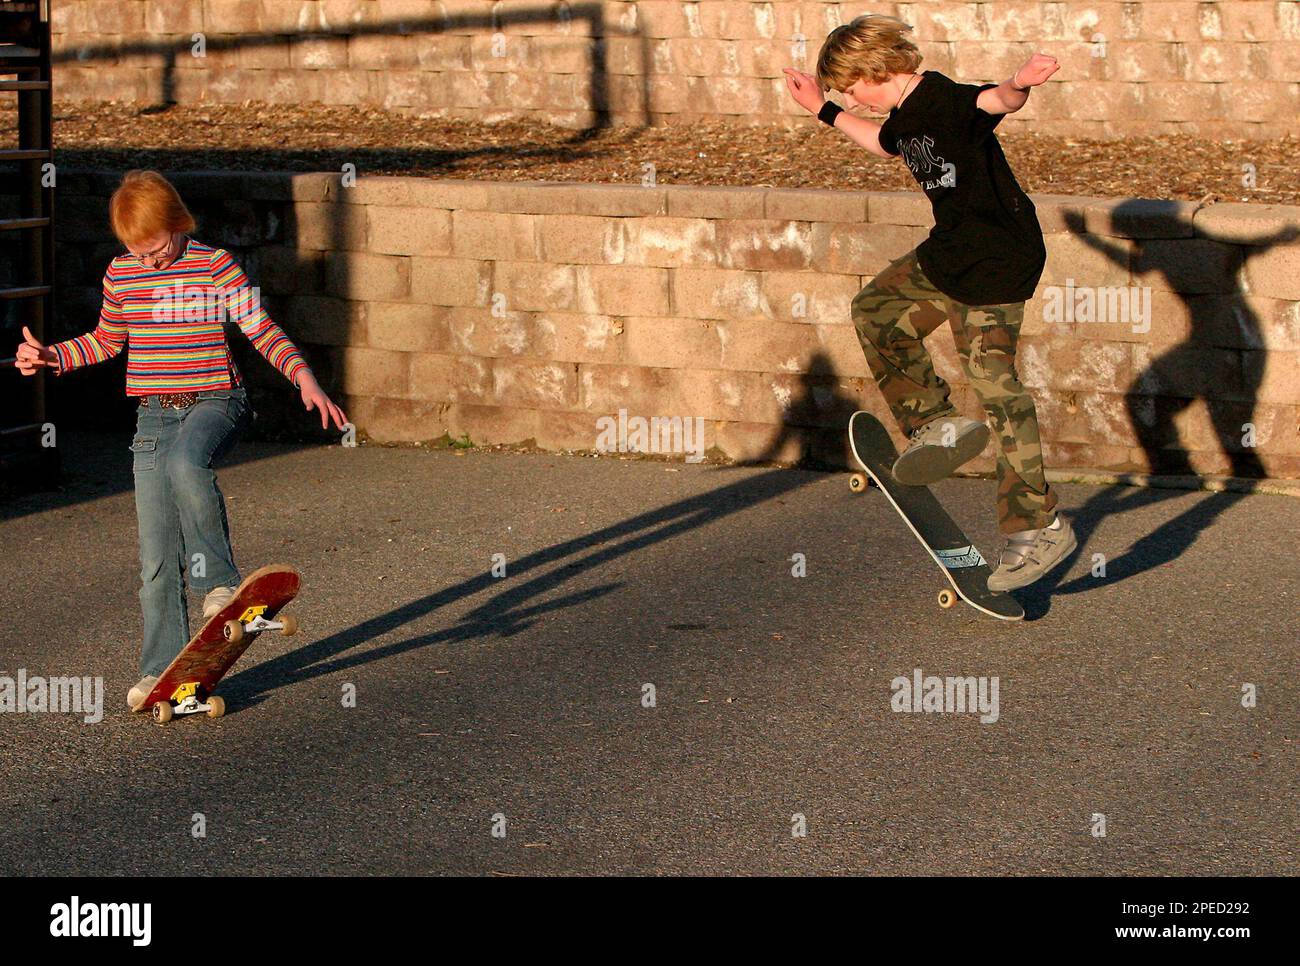 Michael Harvey, 14, right, gives skateboarding lessons to his younger  sister Candace, 12, Wednesday, Feb. 16, 2005, in Farmington, N.M. (AP  Photo/The Daily Times, Dave Watson Stock Photo - Alamy